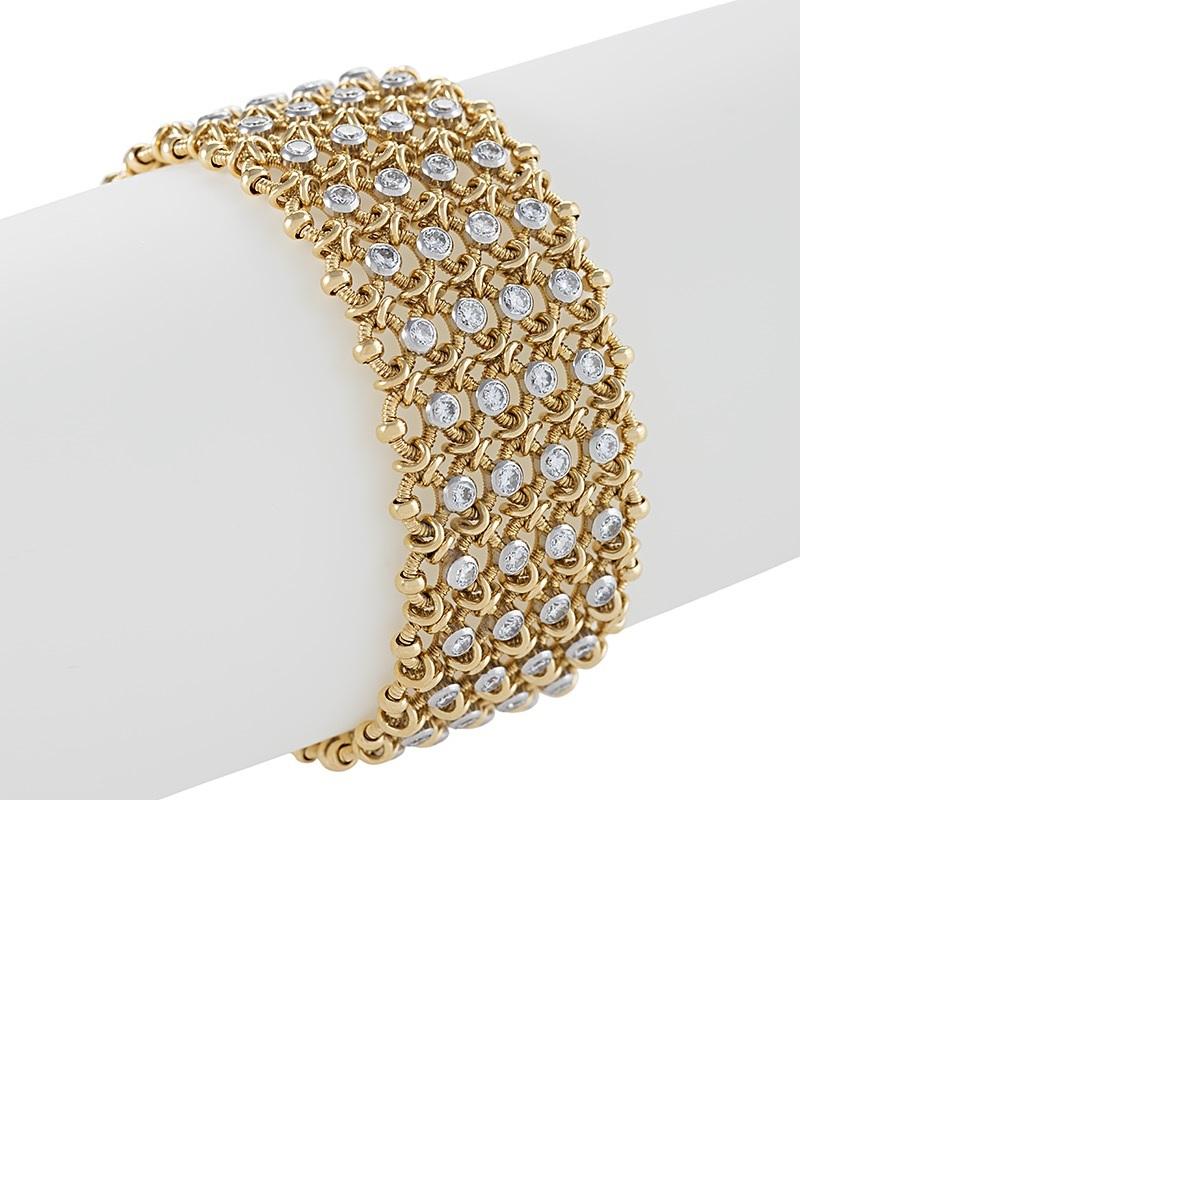 The sinuously fluid drape of this woven mesh link gold Cartier Paris bracelet, sprinkled with diamonds, sheaths the wrist with a light touch, as if it is made of the finest chainmail. Ribbed circular links are woven together with polished ties and